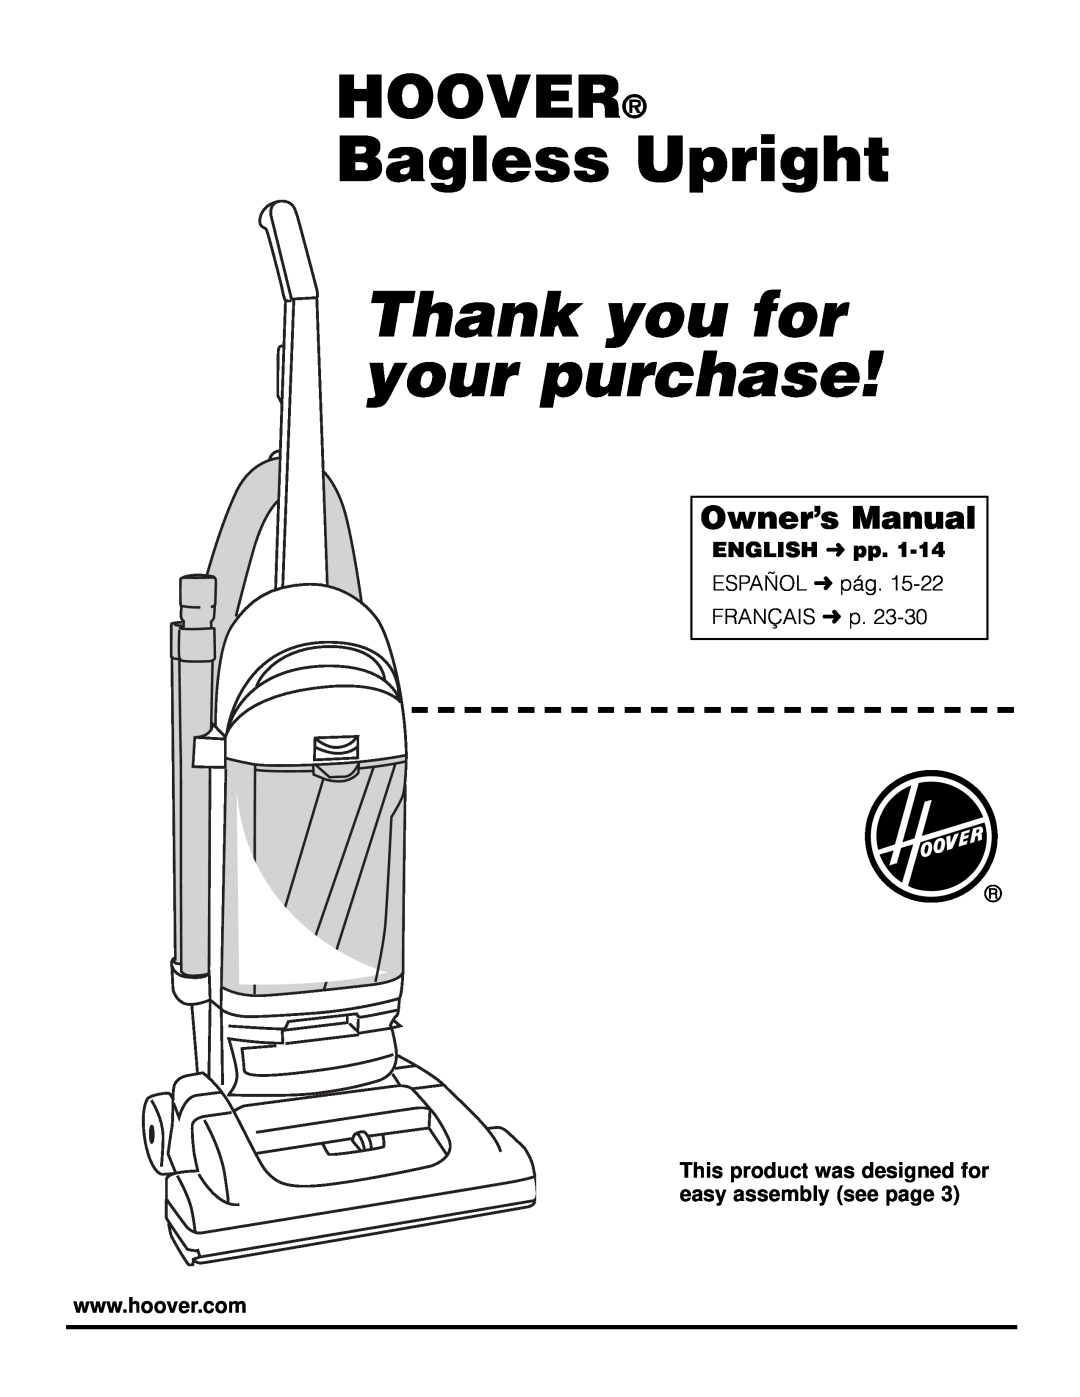 Hoover U5361950 owner manual Owner’s Manual, Bagless Upright, Thank you for your purchase, Hoover, ENGLISH pp 